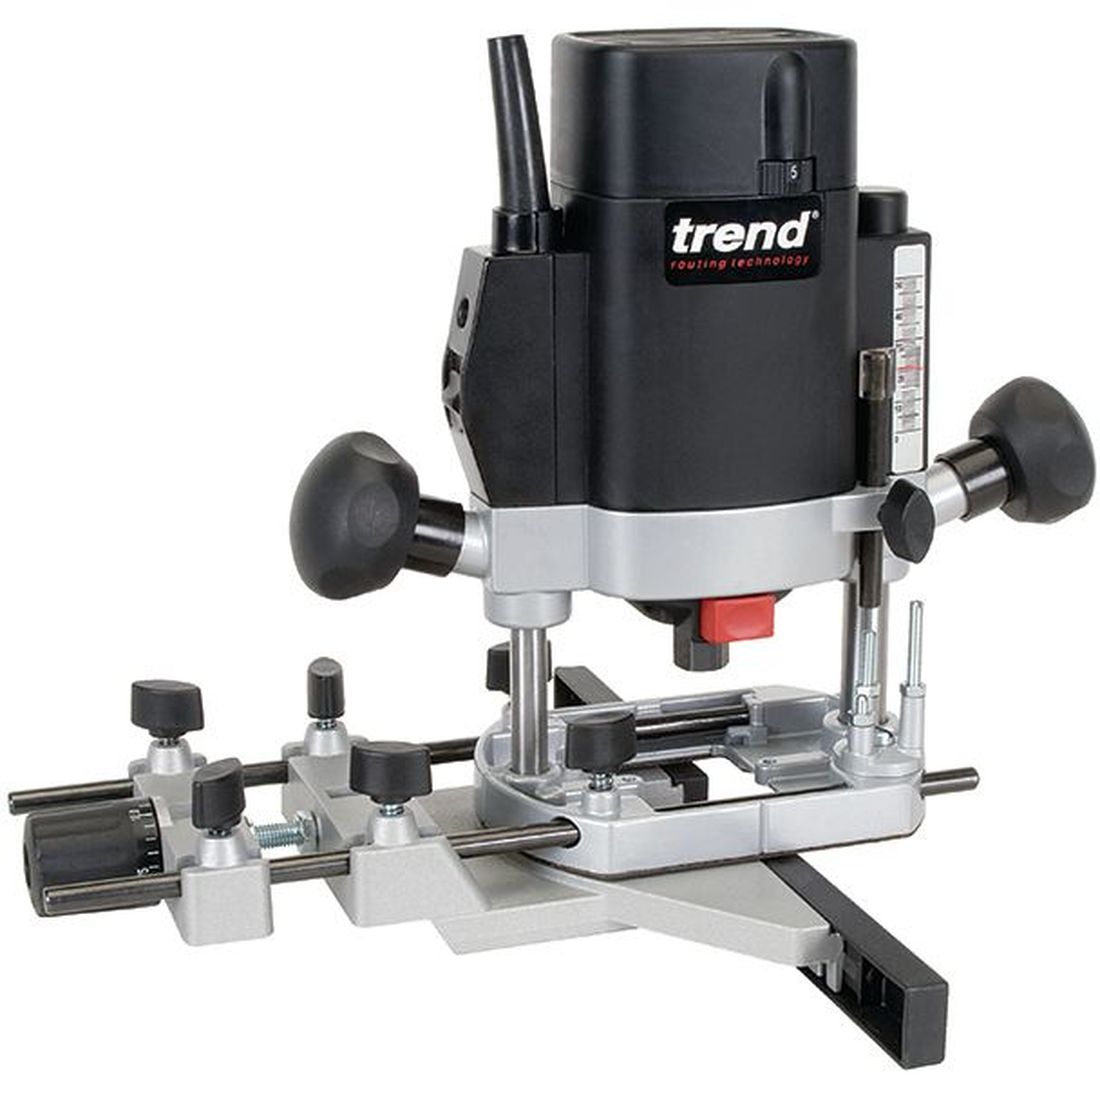 Trend T5EB 1/4in Variable Speed Router 1000W 240V                                     